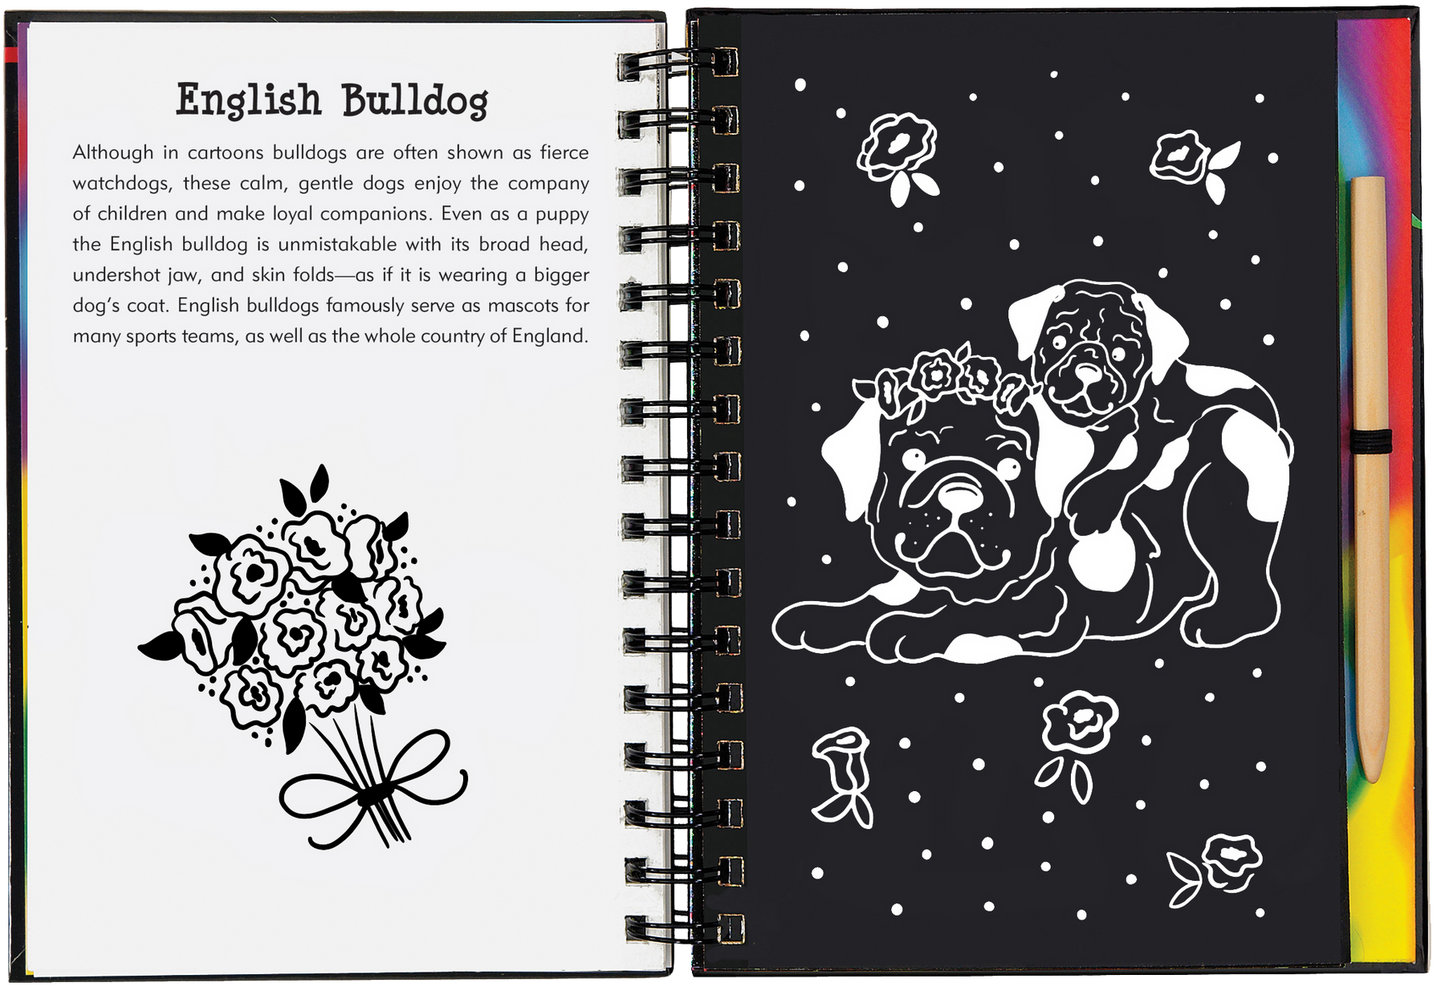 This is a Trace-Along Scratch and Sketch! Use the wooden stylus included to trace the white outlines on the black-coated pages and reveal the glittery foil and rainbow-swirl colors beneath!